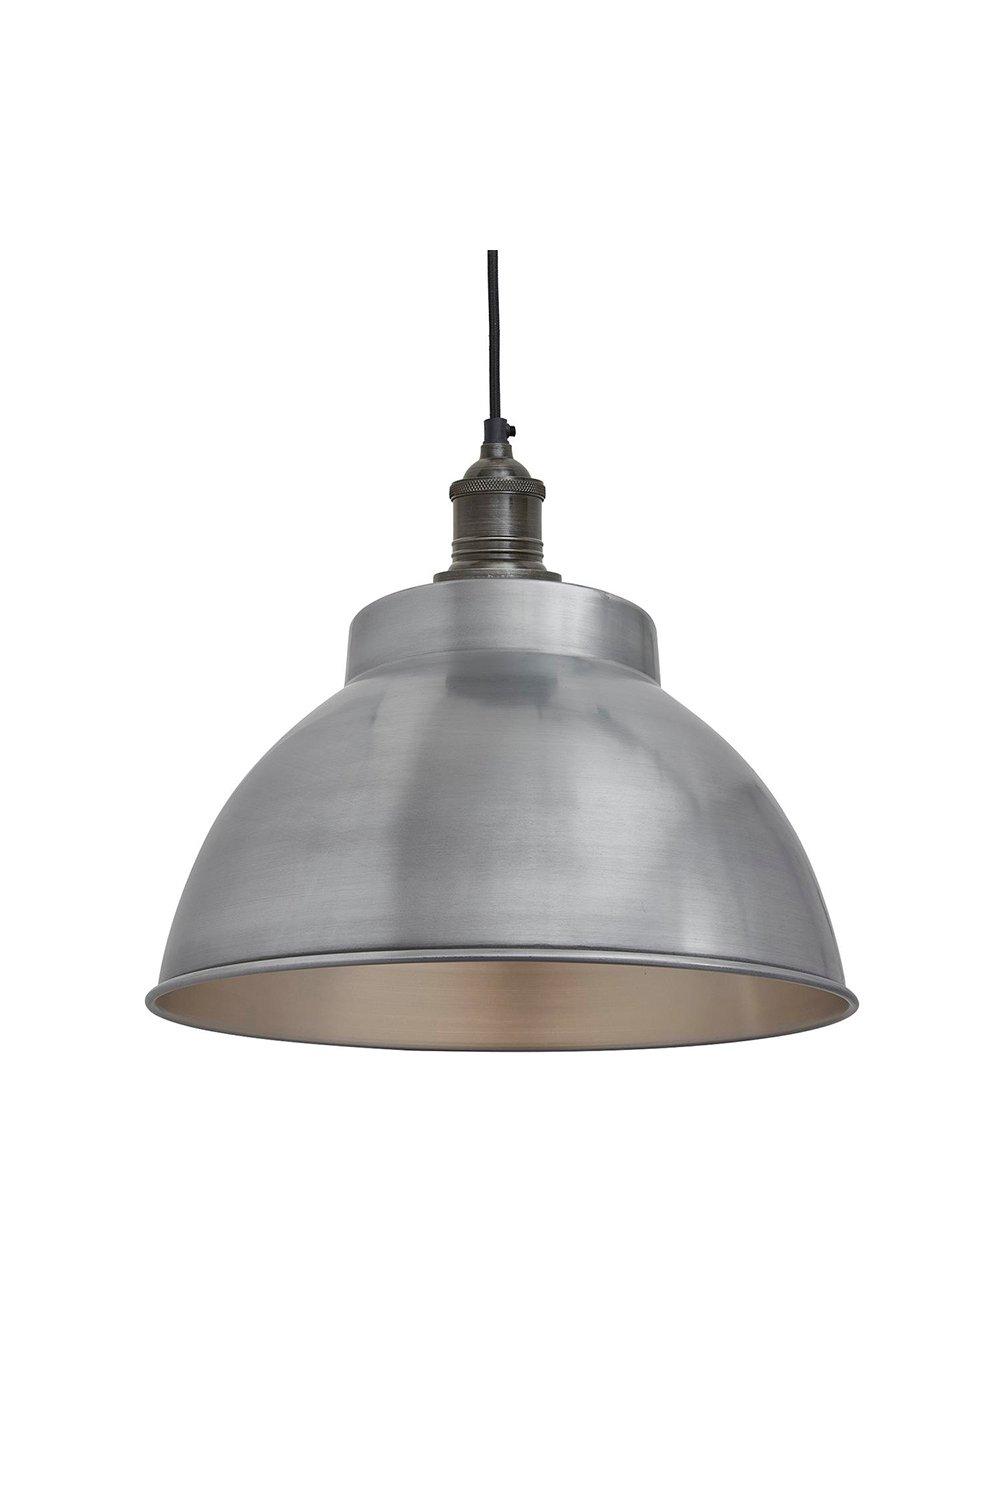 Brooklyn Dome Pendant, 13 Inch, Light Pewter, Pewter Holder